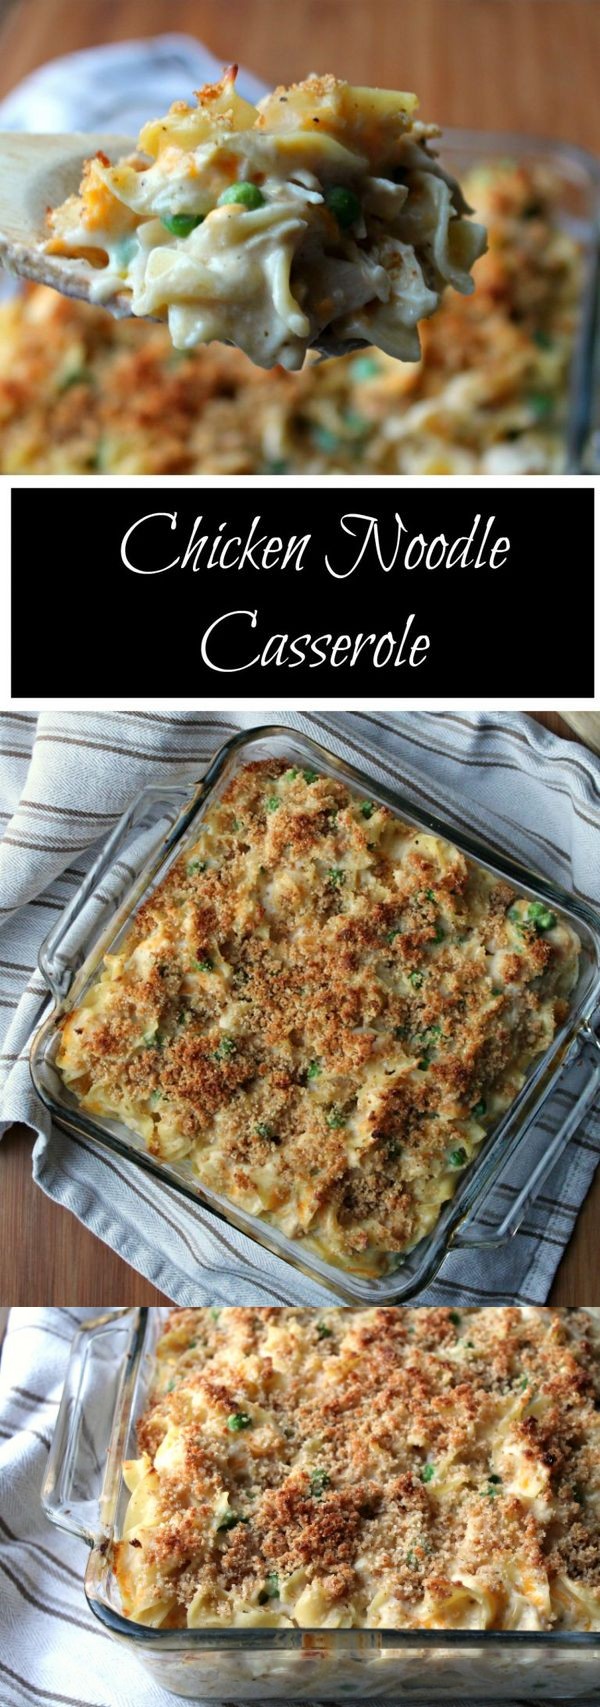 Just Like Your Grandma's Chicken Noodle Casserole